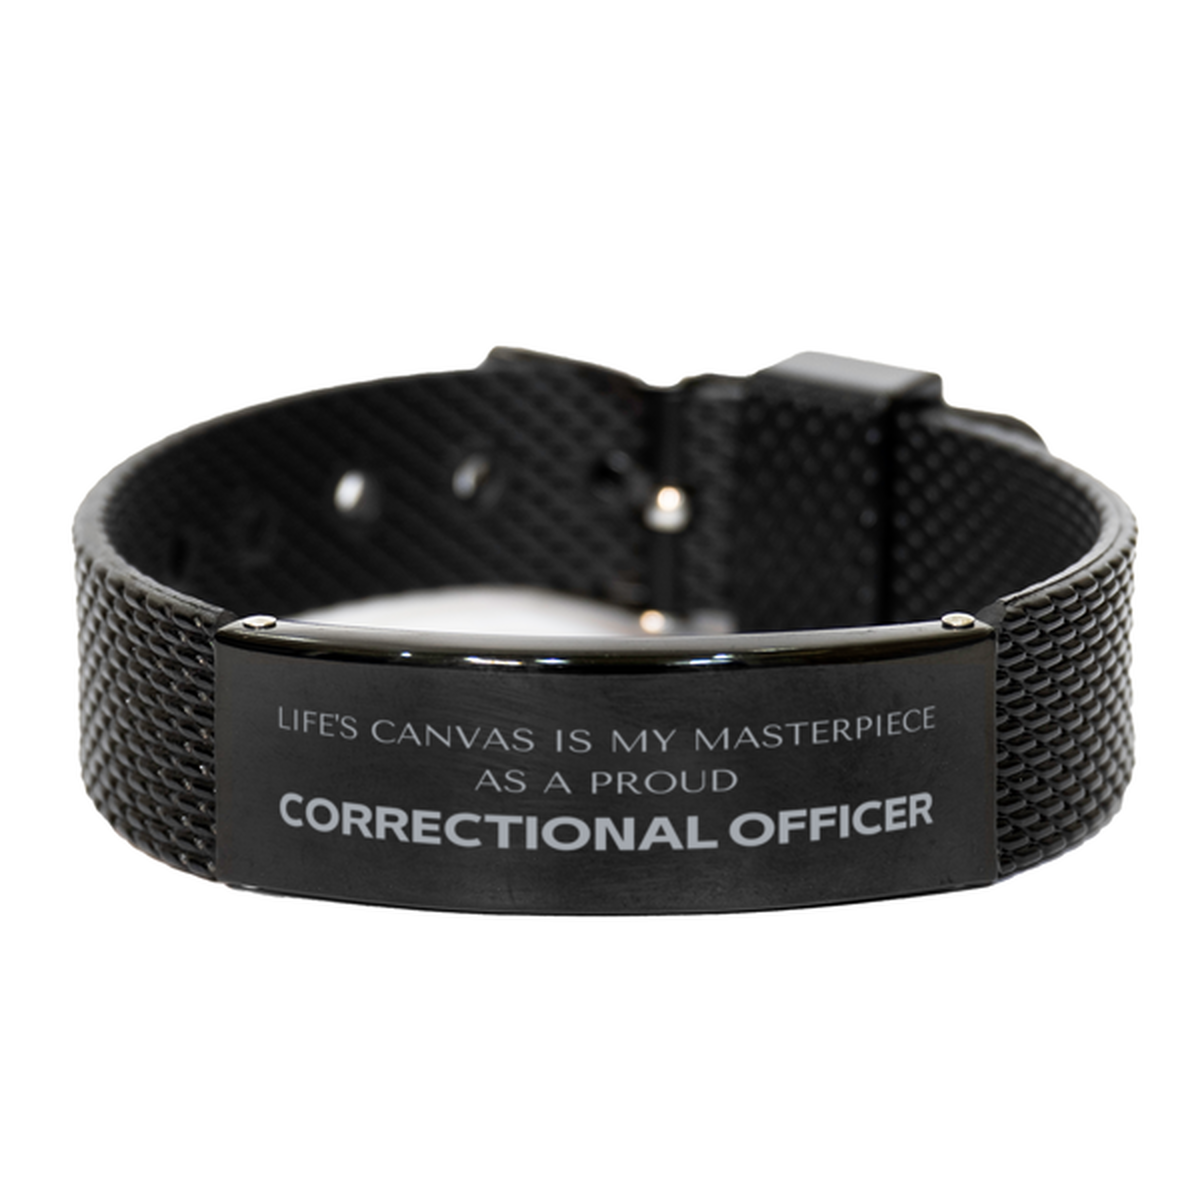 Proud Correctional Officer Gifts, Life's canvas is my masterpiece, Epic Birthday Christmas Unique Black Shark Mesh Bracelet For Correctional Officer, Coworkers, Men, Women, Friends